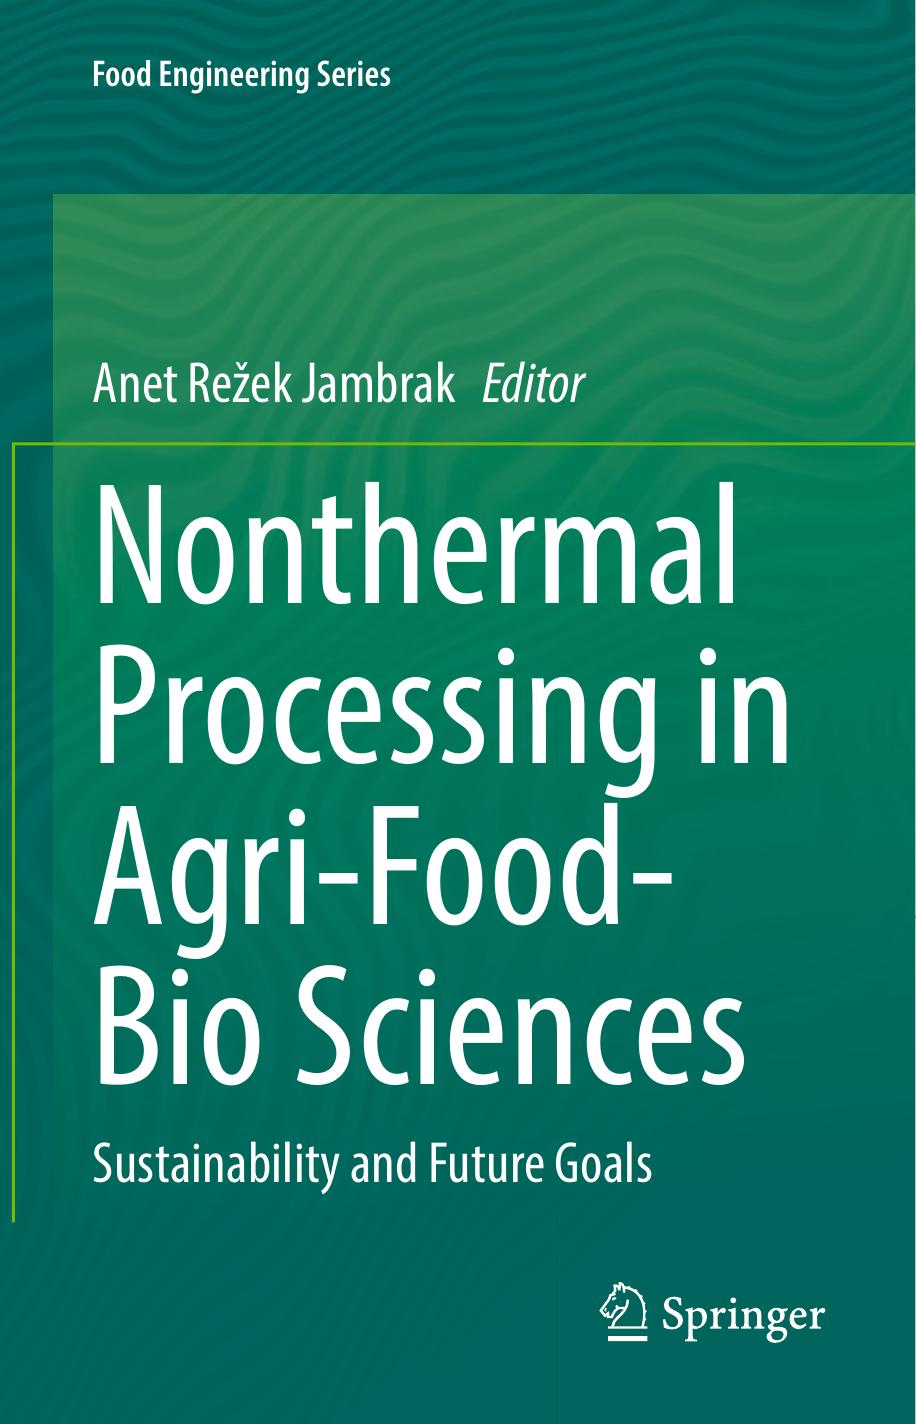 Nonthermal Processing in Agri-Food-Bio Sciences  Sustainability and Future Goals-Springer (2022)